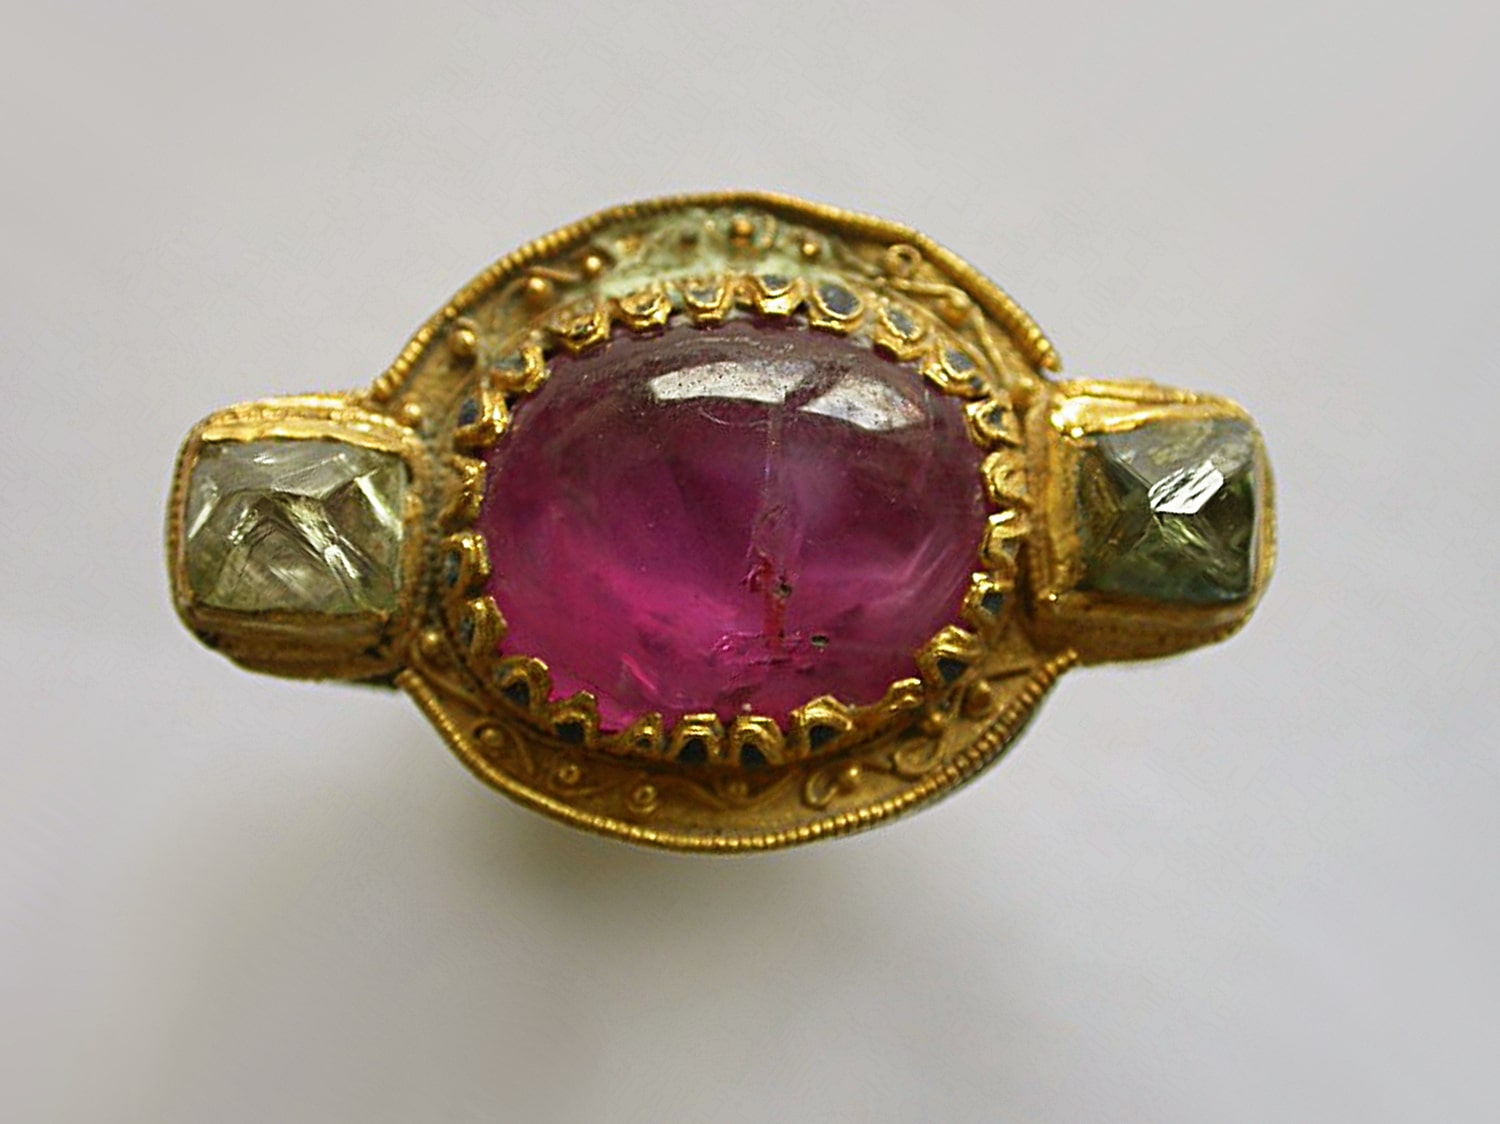 The History, Heritage and Hype behind Golconda Diamonds - - pink sapphire diamond ring credit Osmund Bopearachchi min